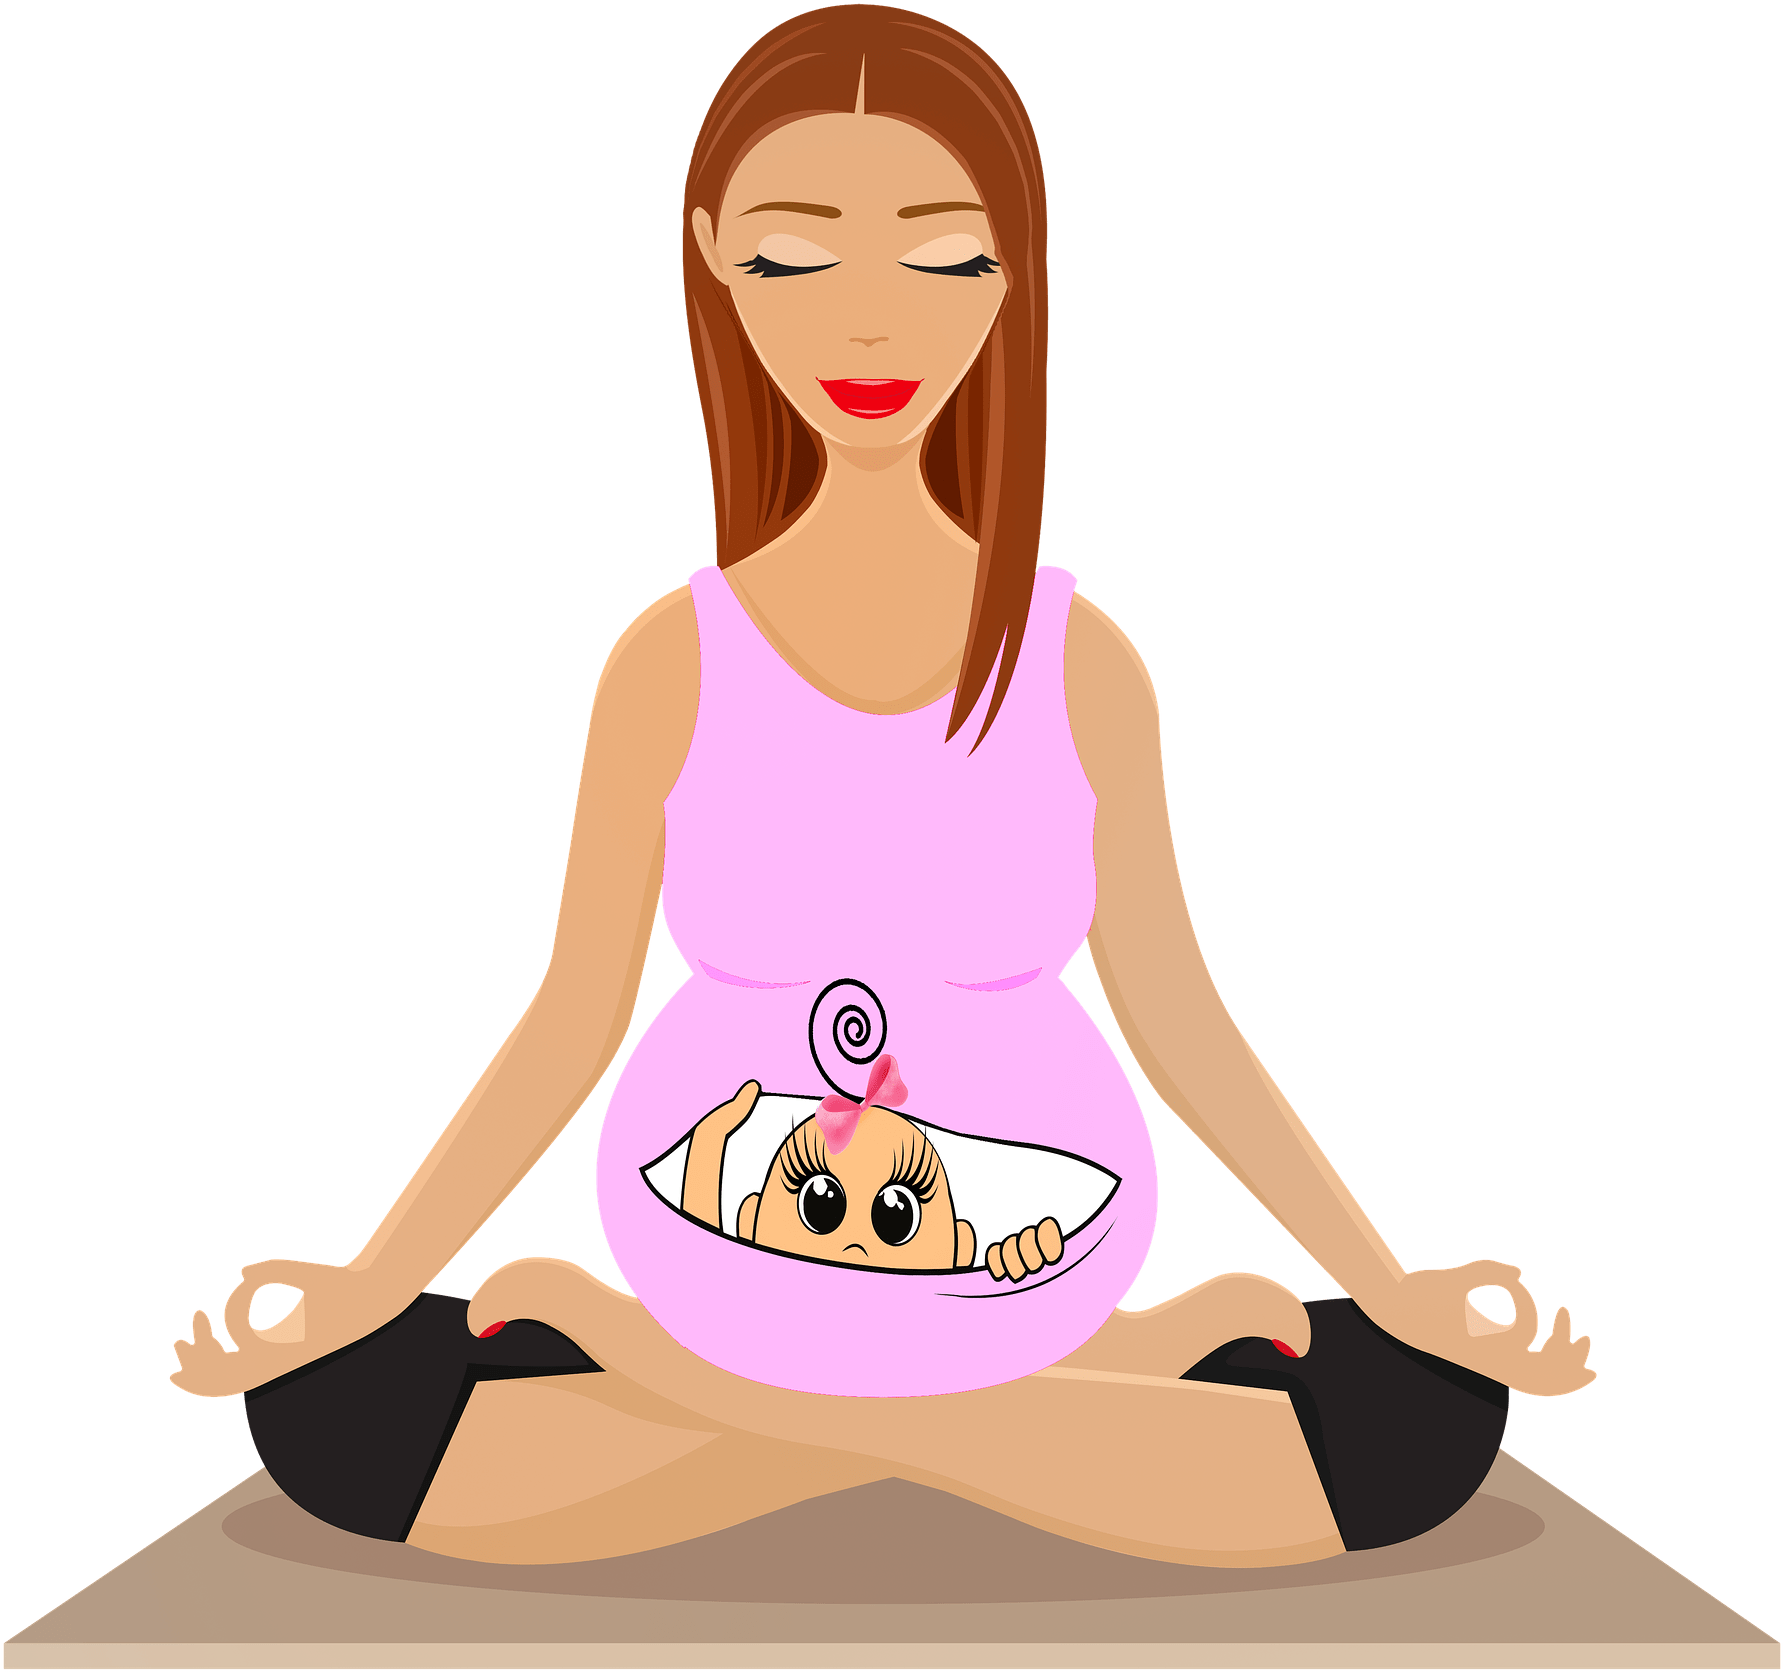 A Pregnant Woman Sitting In Lotus Position With A Baby On Her Belly